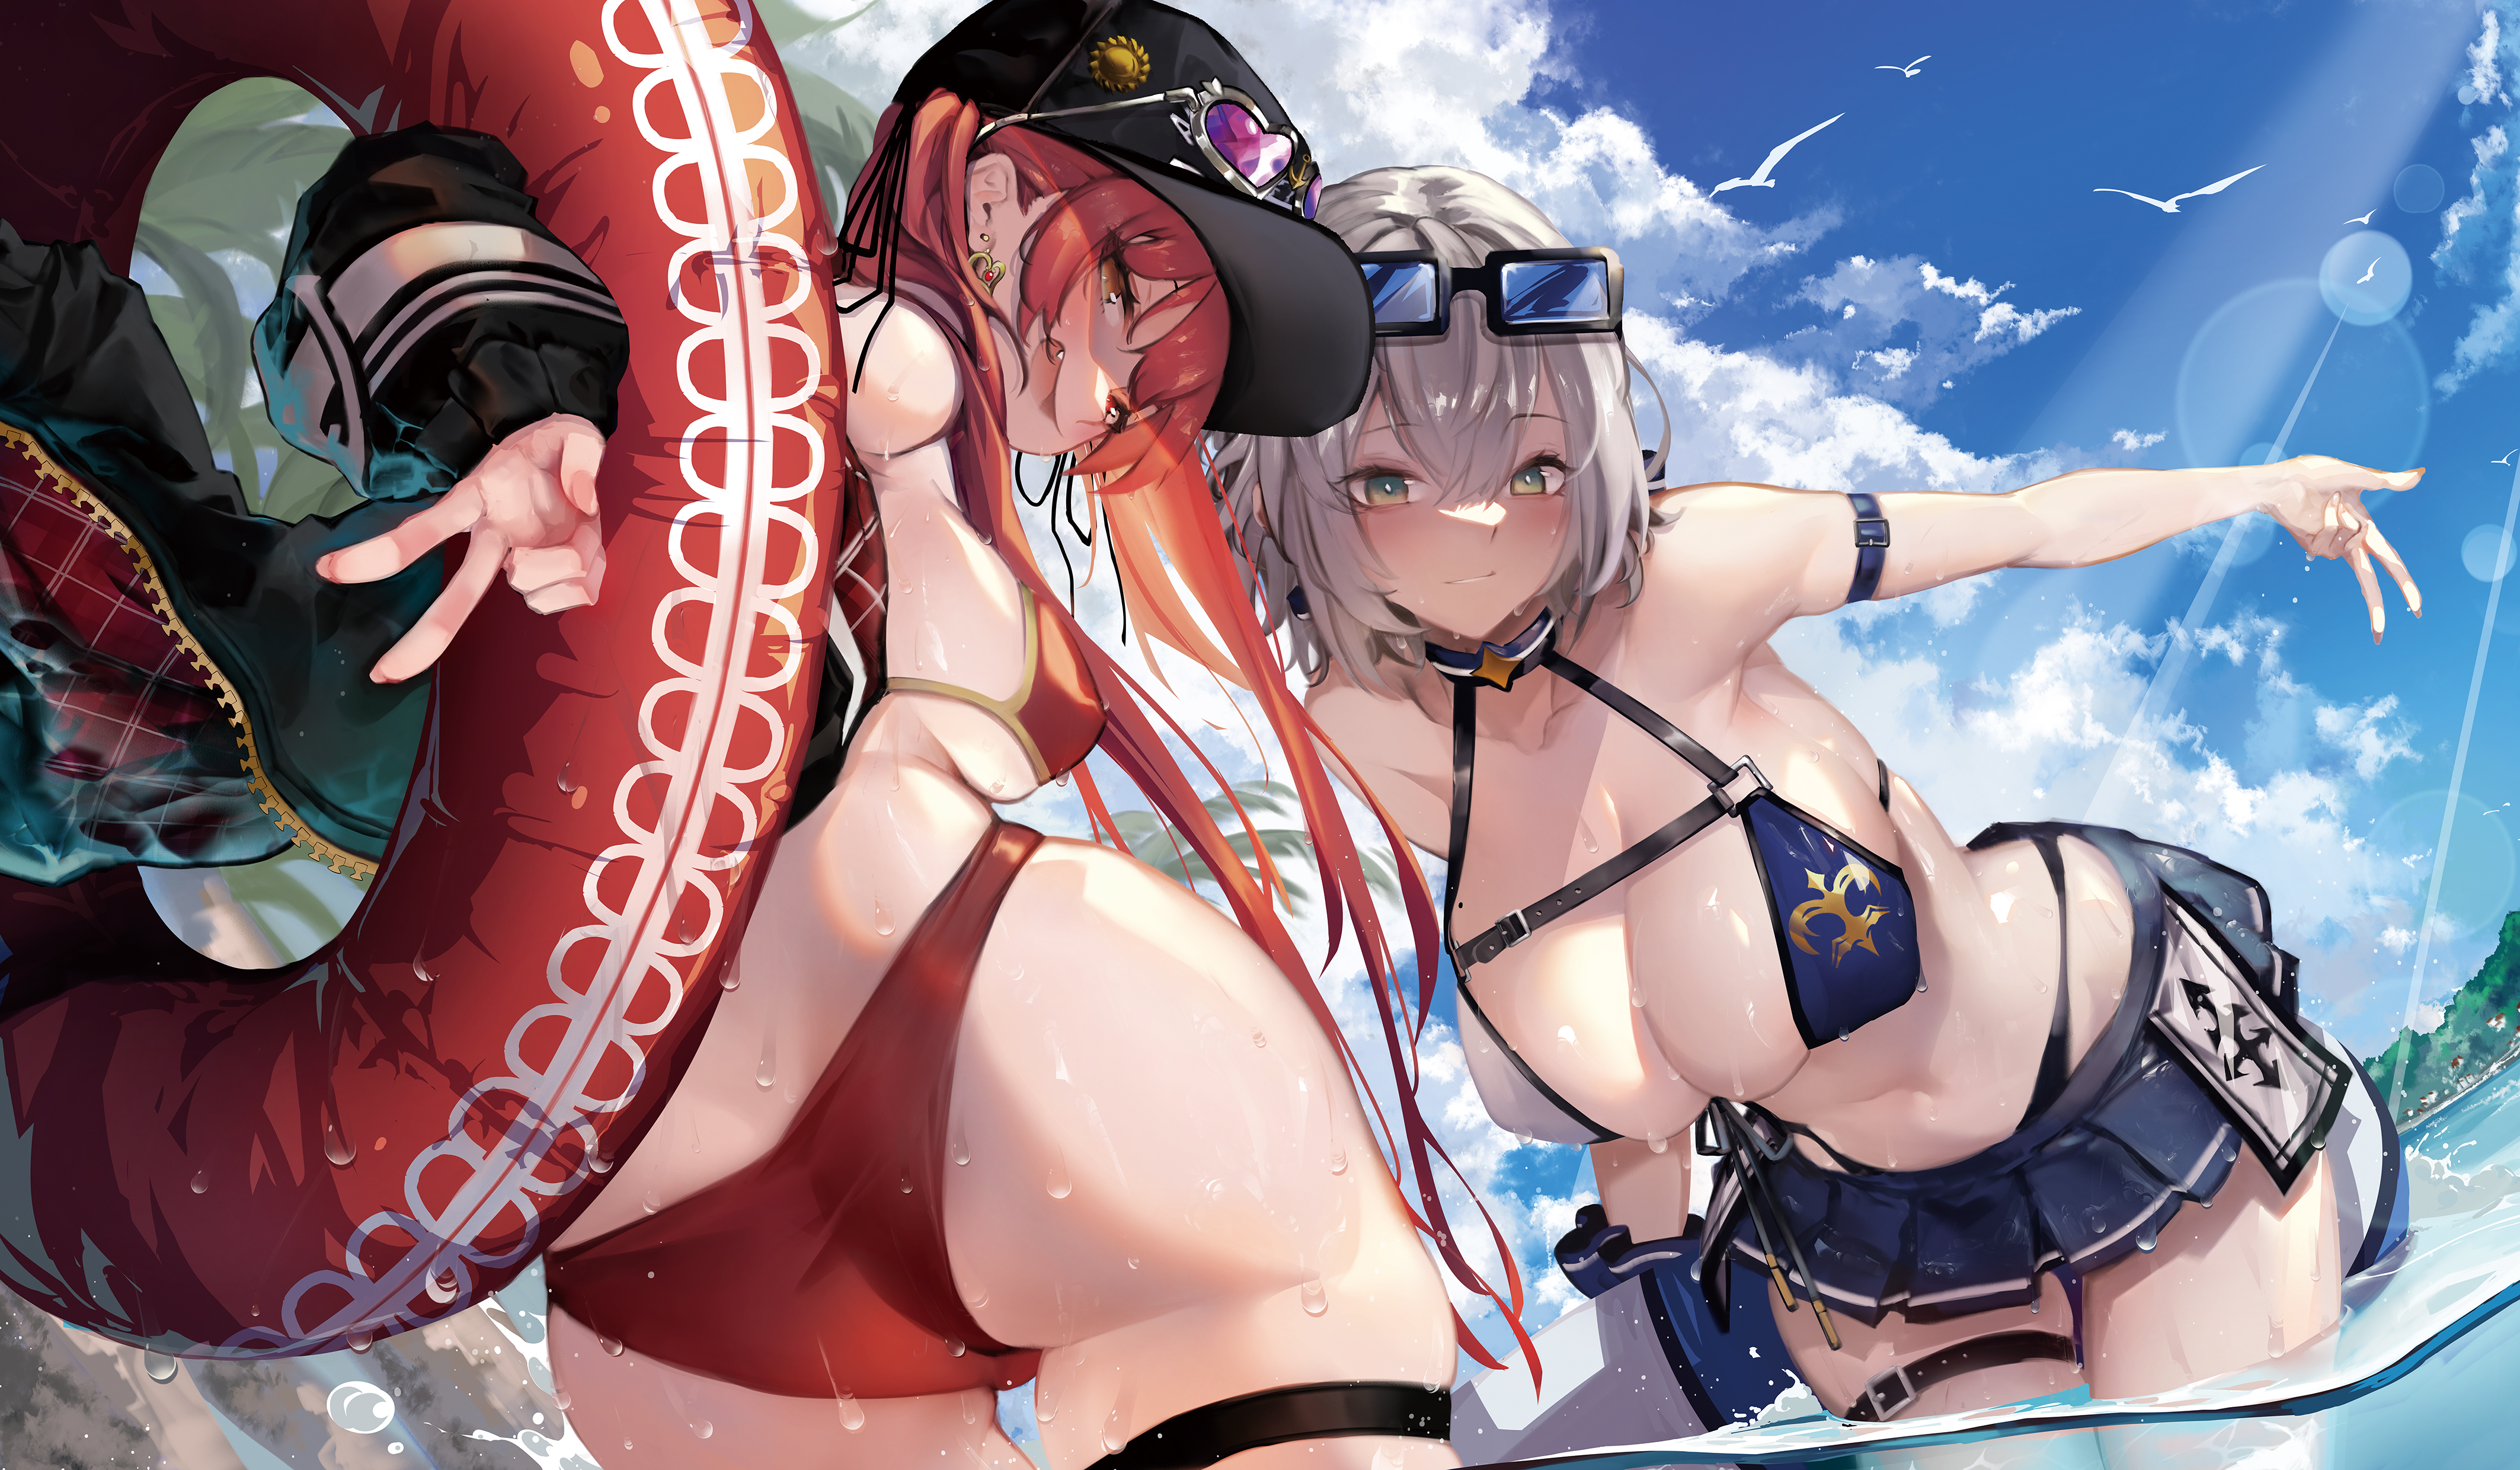 Anime 4252x2480 anime anime girls Hololive Houshou Marine Shirogane Noel clouds Virtual Youtuber wet body hair between eyes water peace sign sunglasses outdoors women outdoors BabyG Wong standing standing in water sunlight huge breasts cleavage closed mouth open mouth sideboob heterochromia earring sky skirt bikini redhead ass gray hair dripping sun rays smiling mole on breast moles collarbone long hair water drops hat